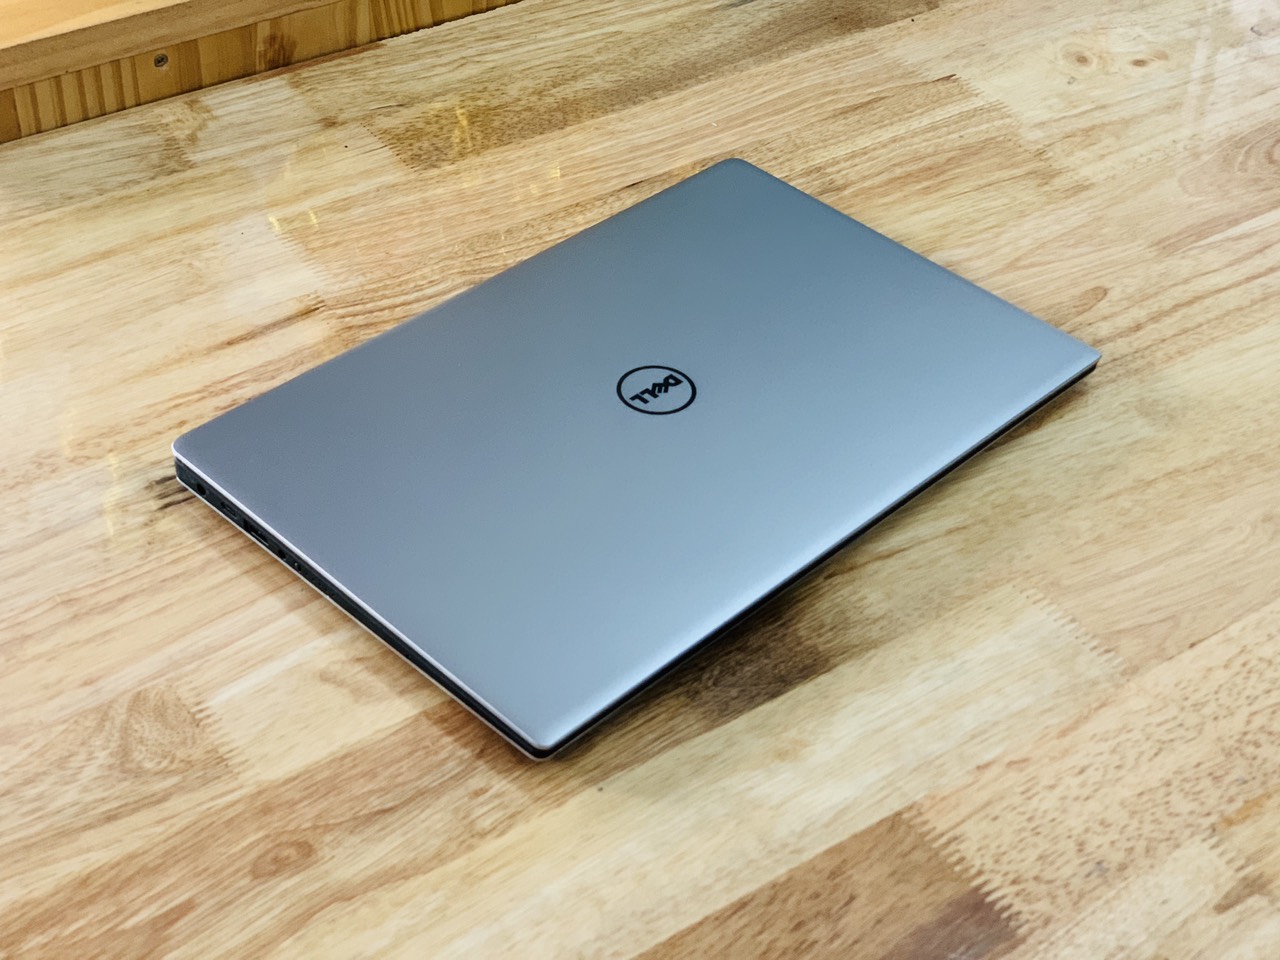 Dell XPS 13 – 9350 